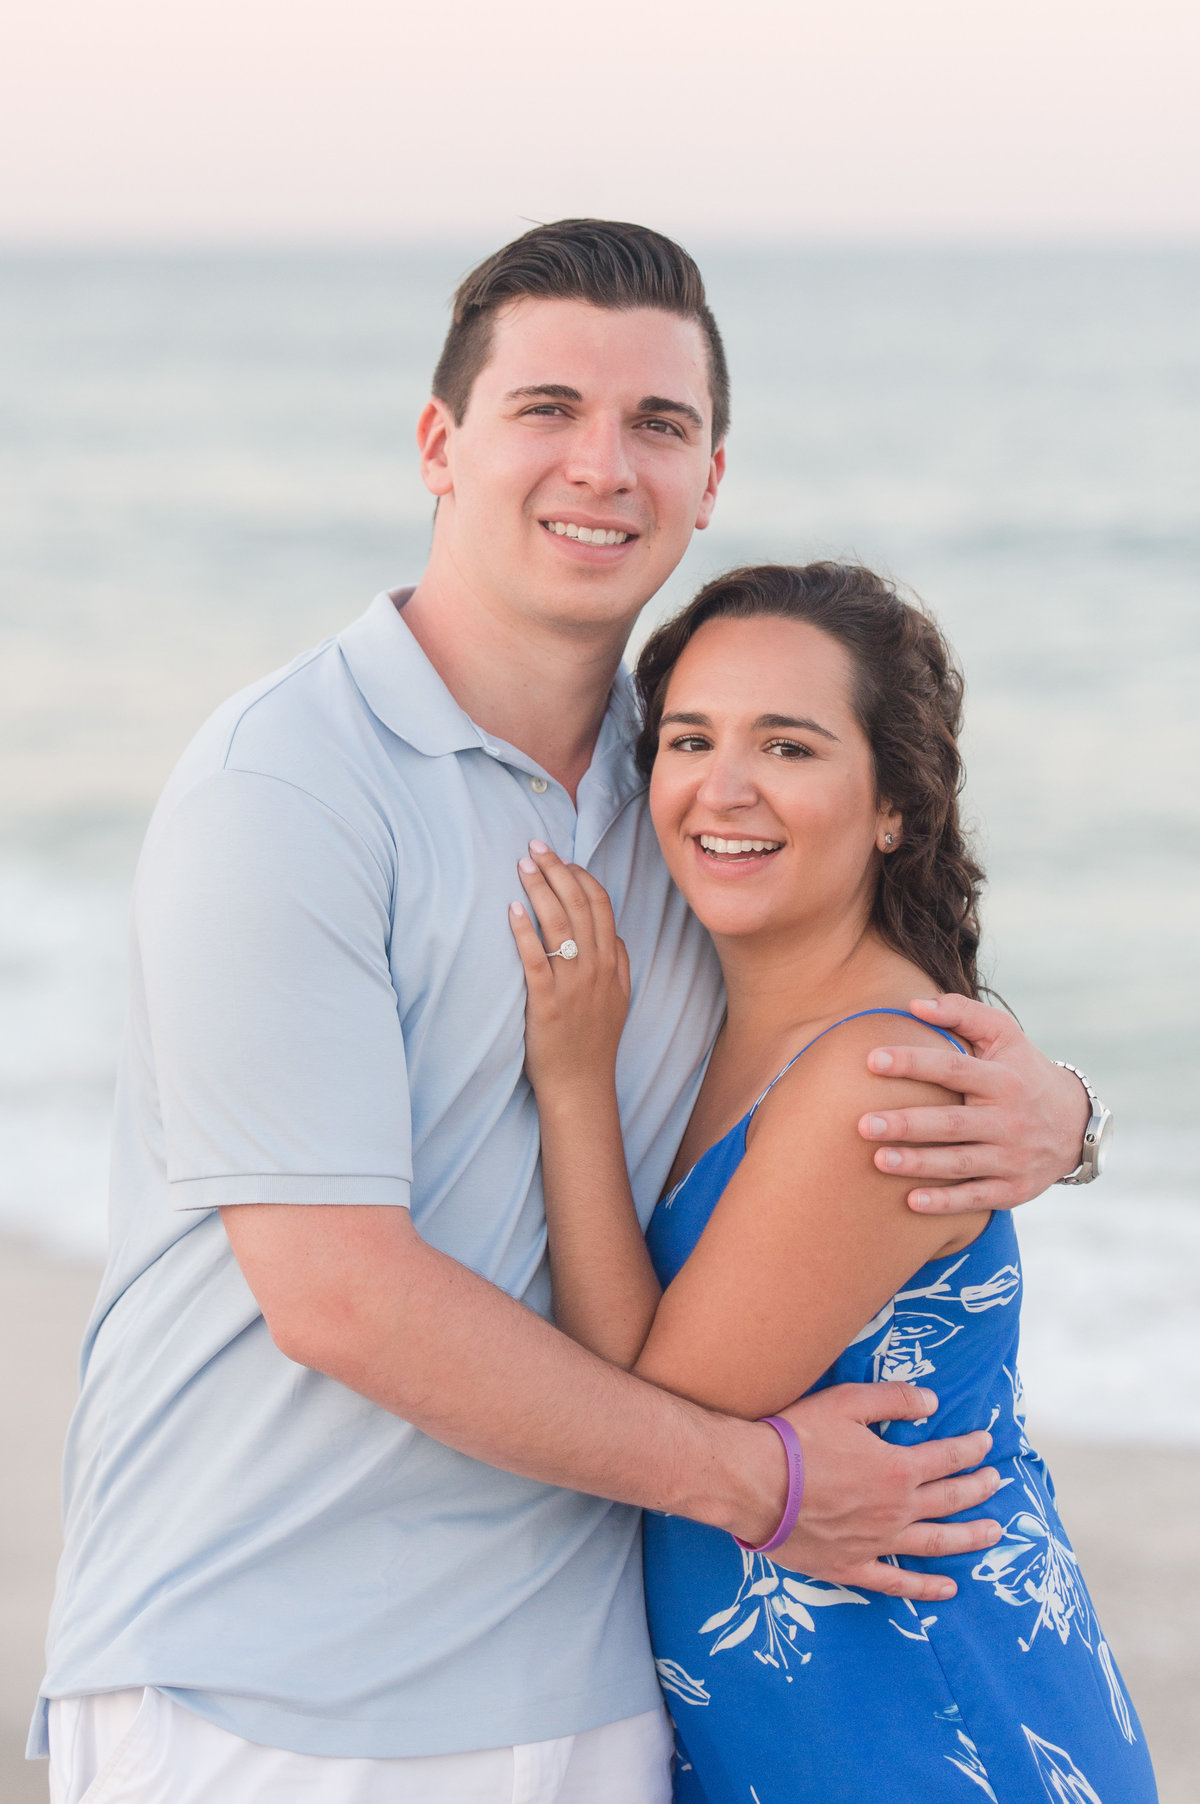 summer-surprise-proposal-lavallette-beach-new-jersey-wedding-photographer-imagery-by-marianne-85